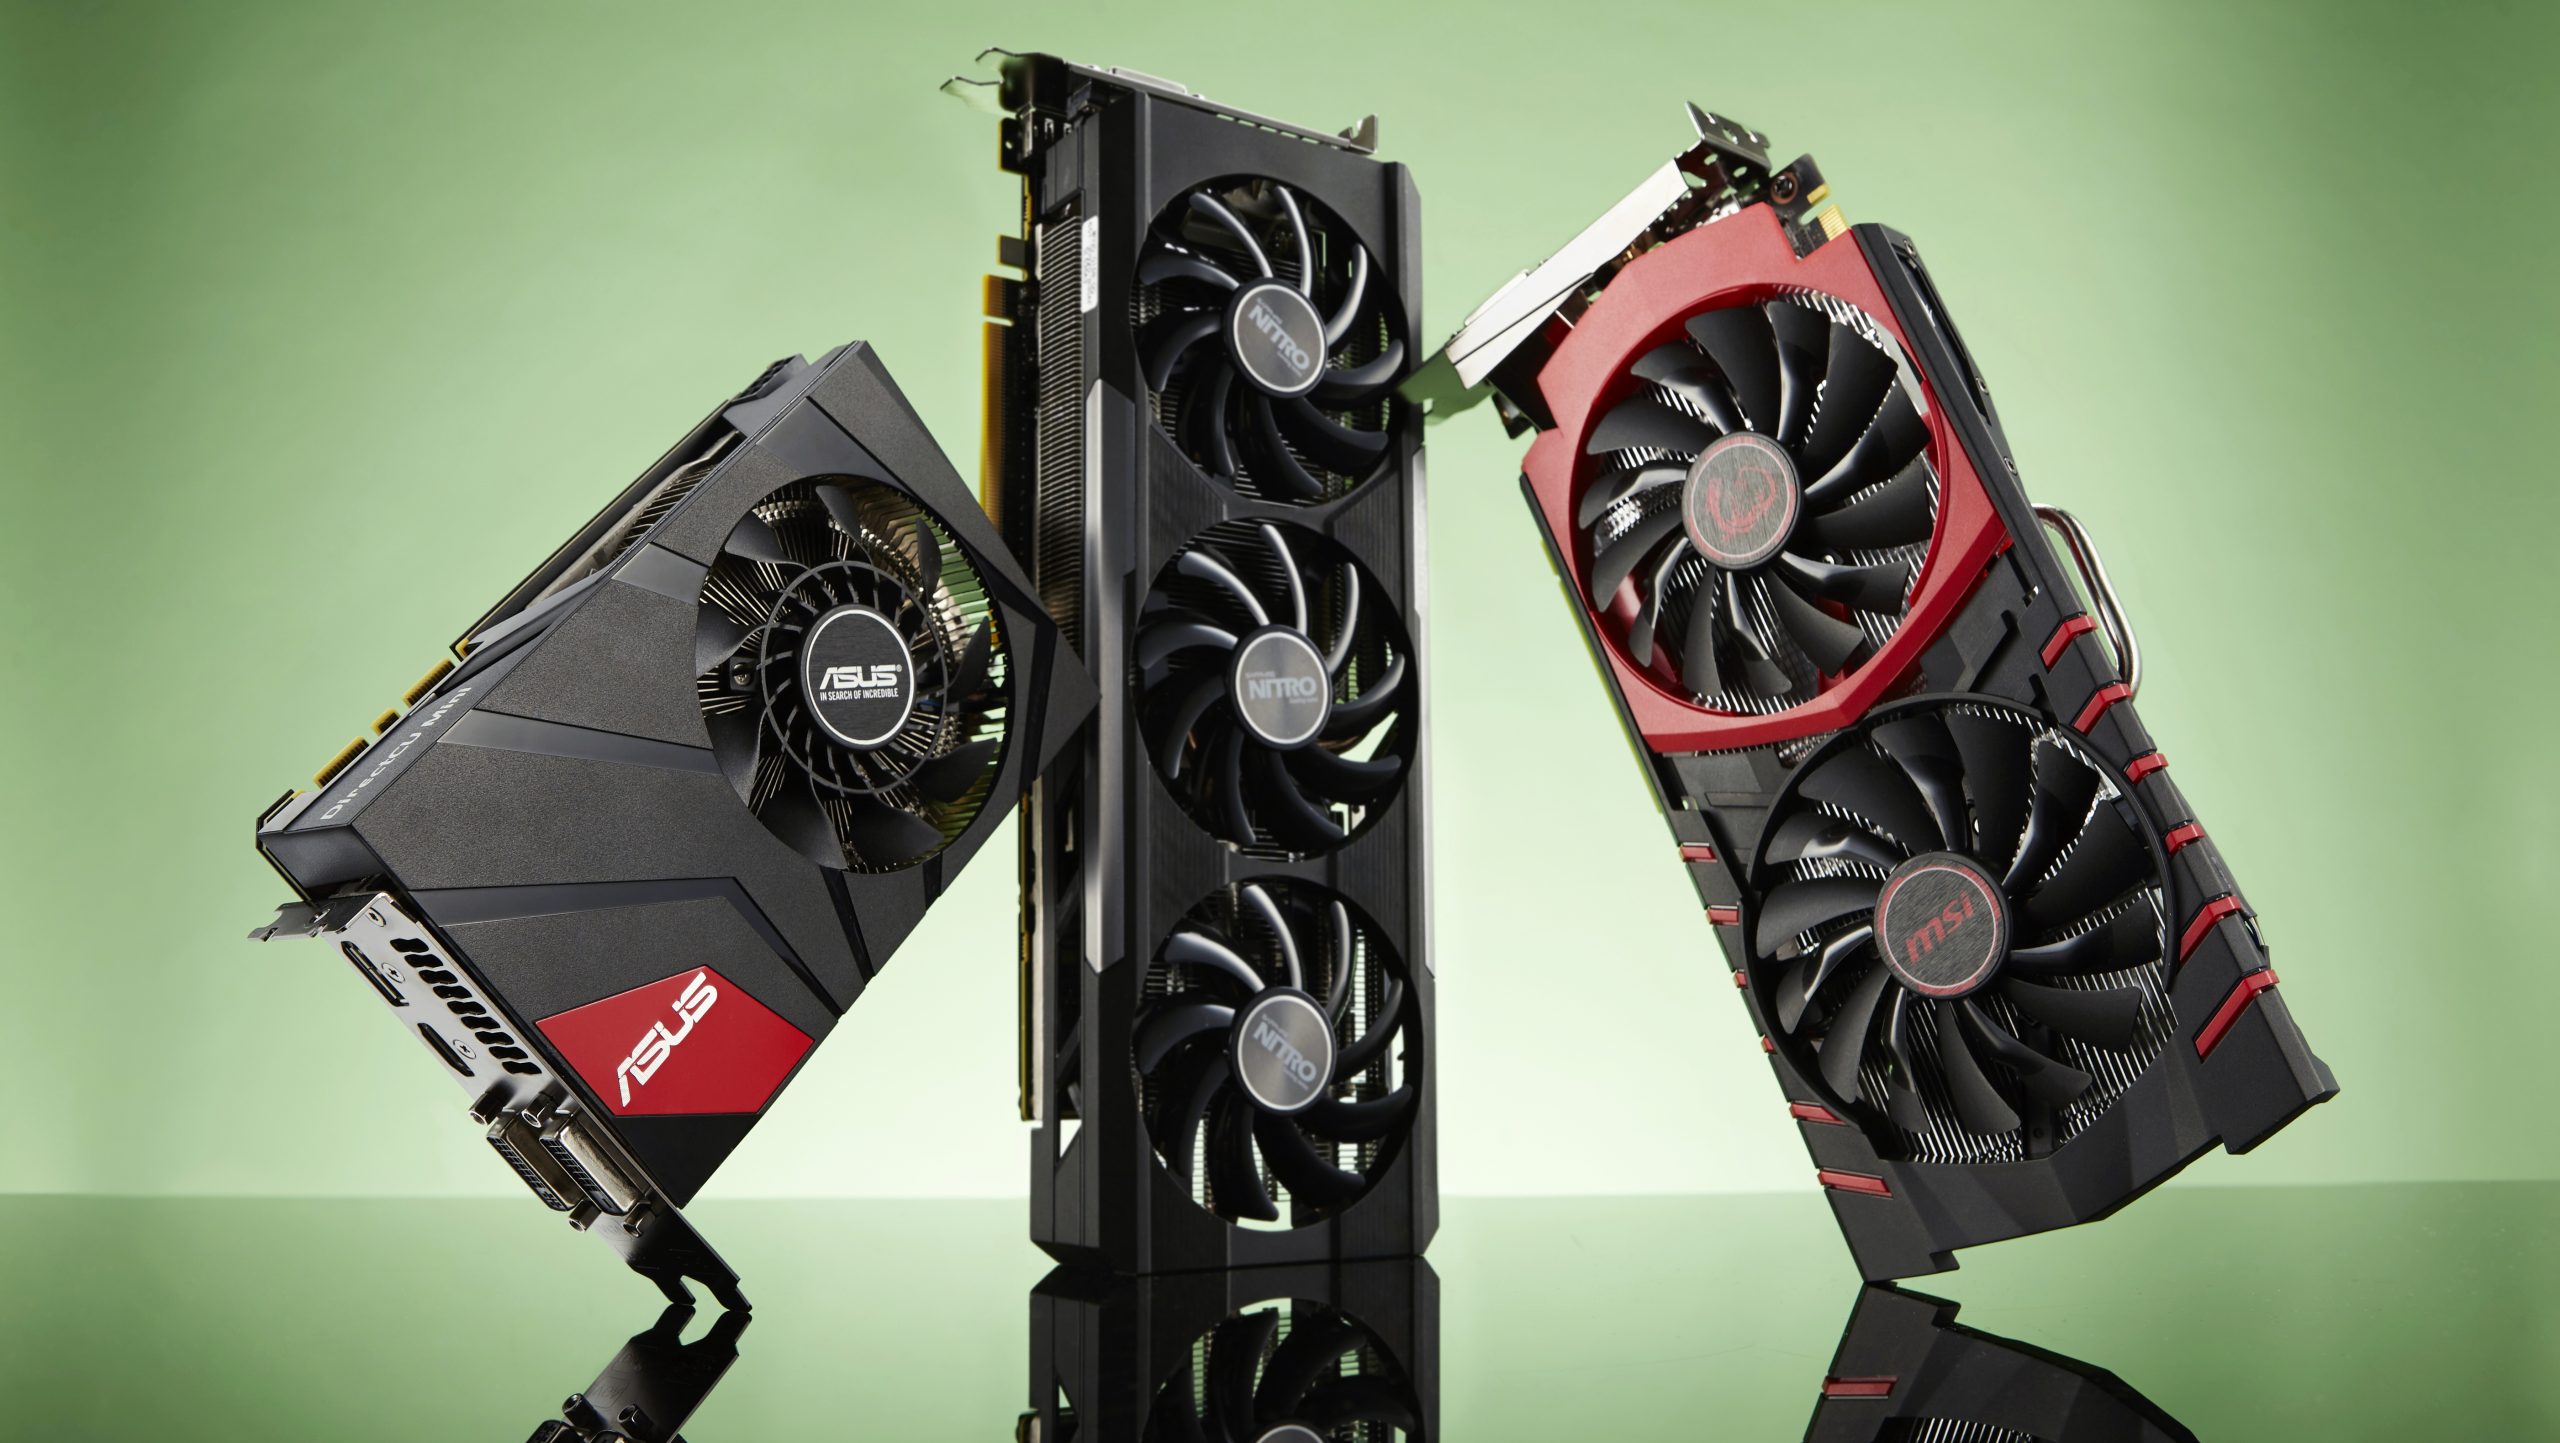 Amd Vs Nvidia 2022: Which Makes The Best Graphics Cards?